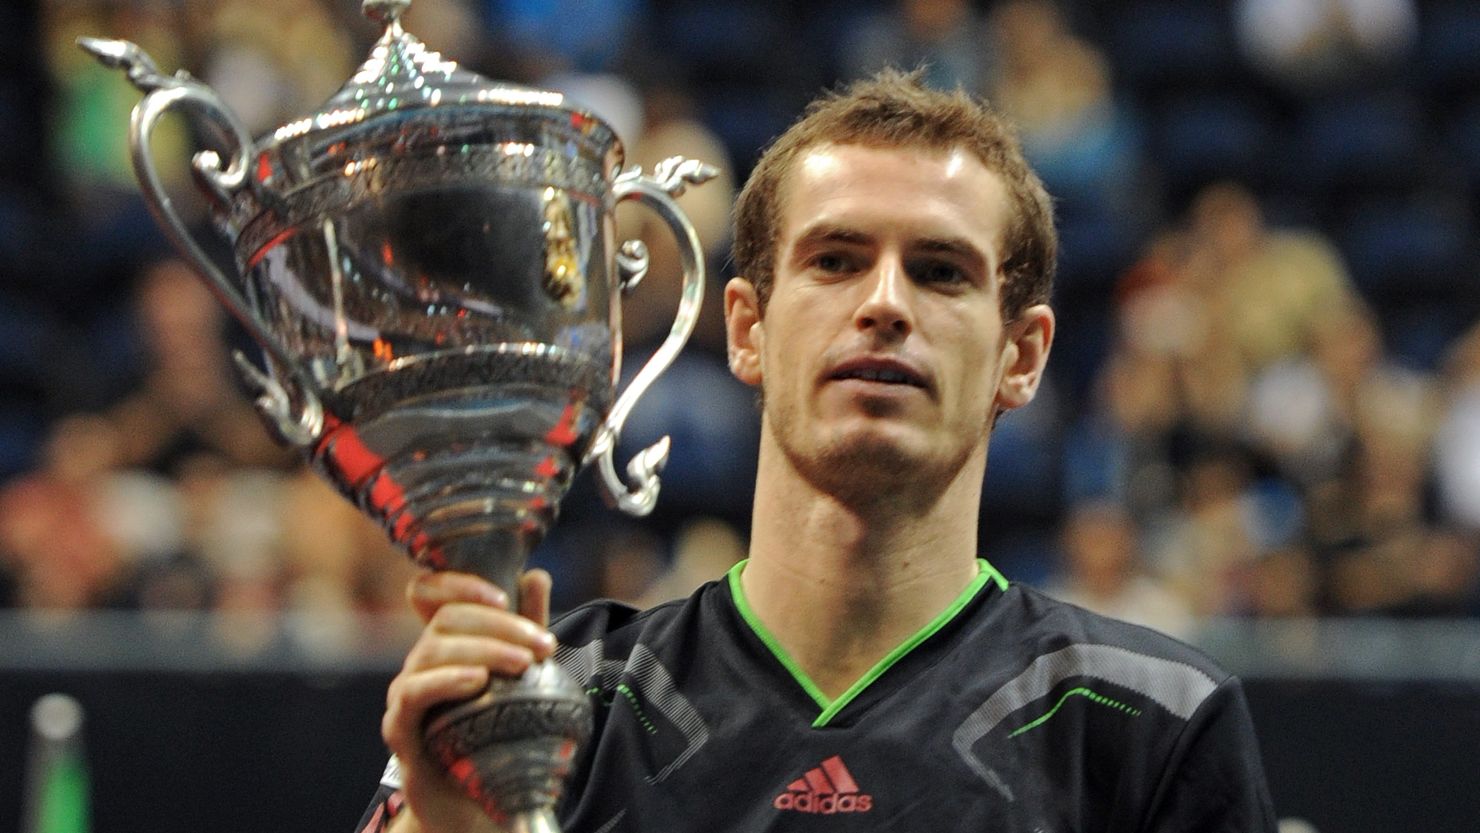 Andy Murray holds aloft the Thailand Open trophy after his easy win over Donald Young